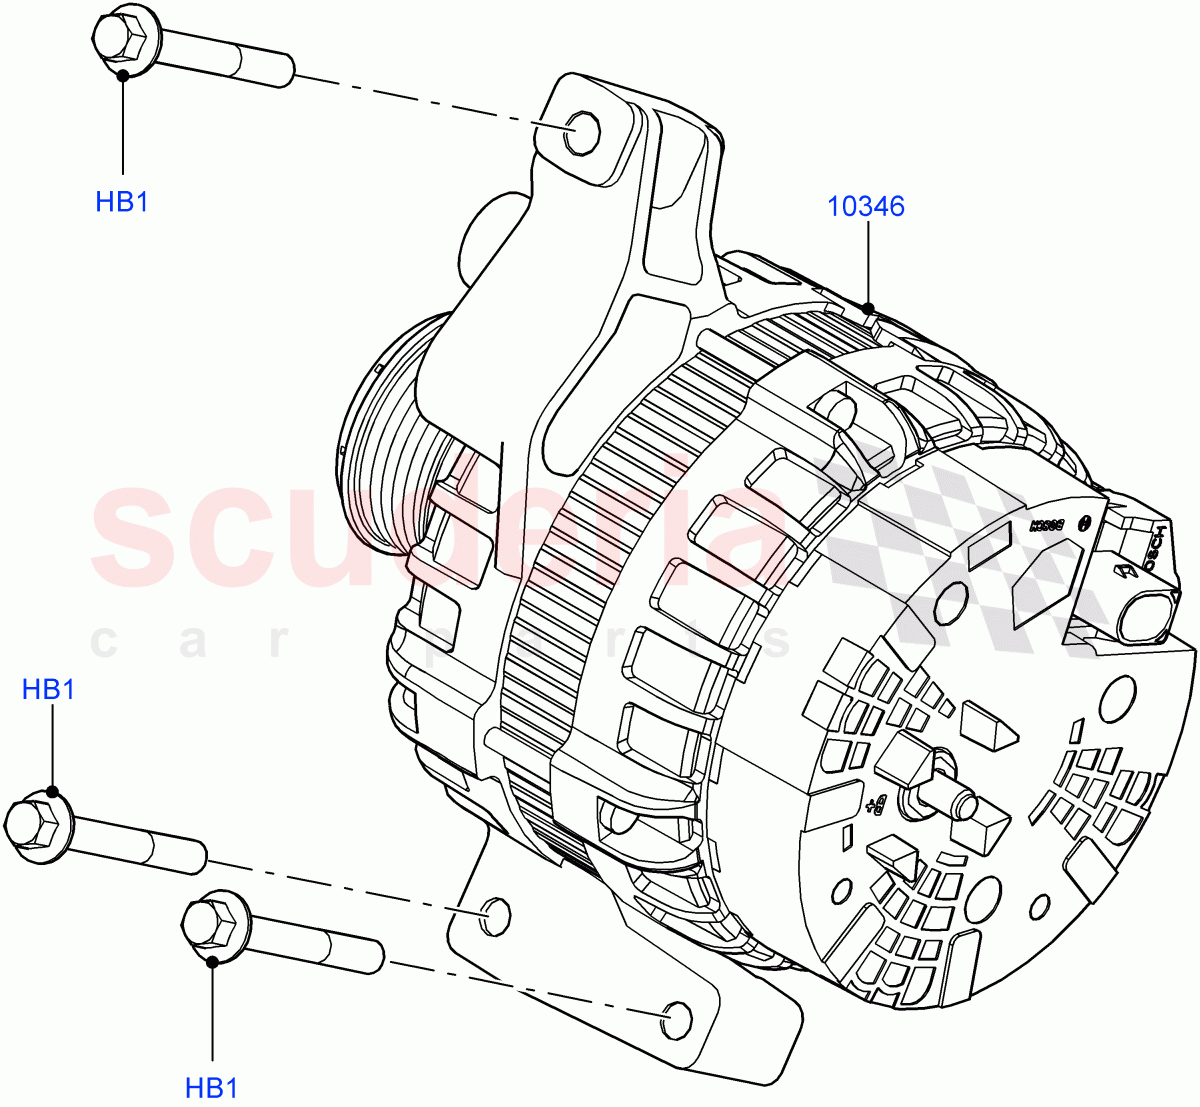 Alternator And Mountings(2.0L 16V TIVCT T/C 240PS Petrol,Changsu (China),2.0L 16V TIVCT T/C Gen2 Petrol)((V)FROMFG000001) of Land Rover Land Rover Discovery Sport (2015+) [2.2 Single Turbo Diesel]